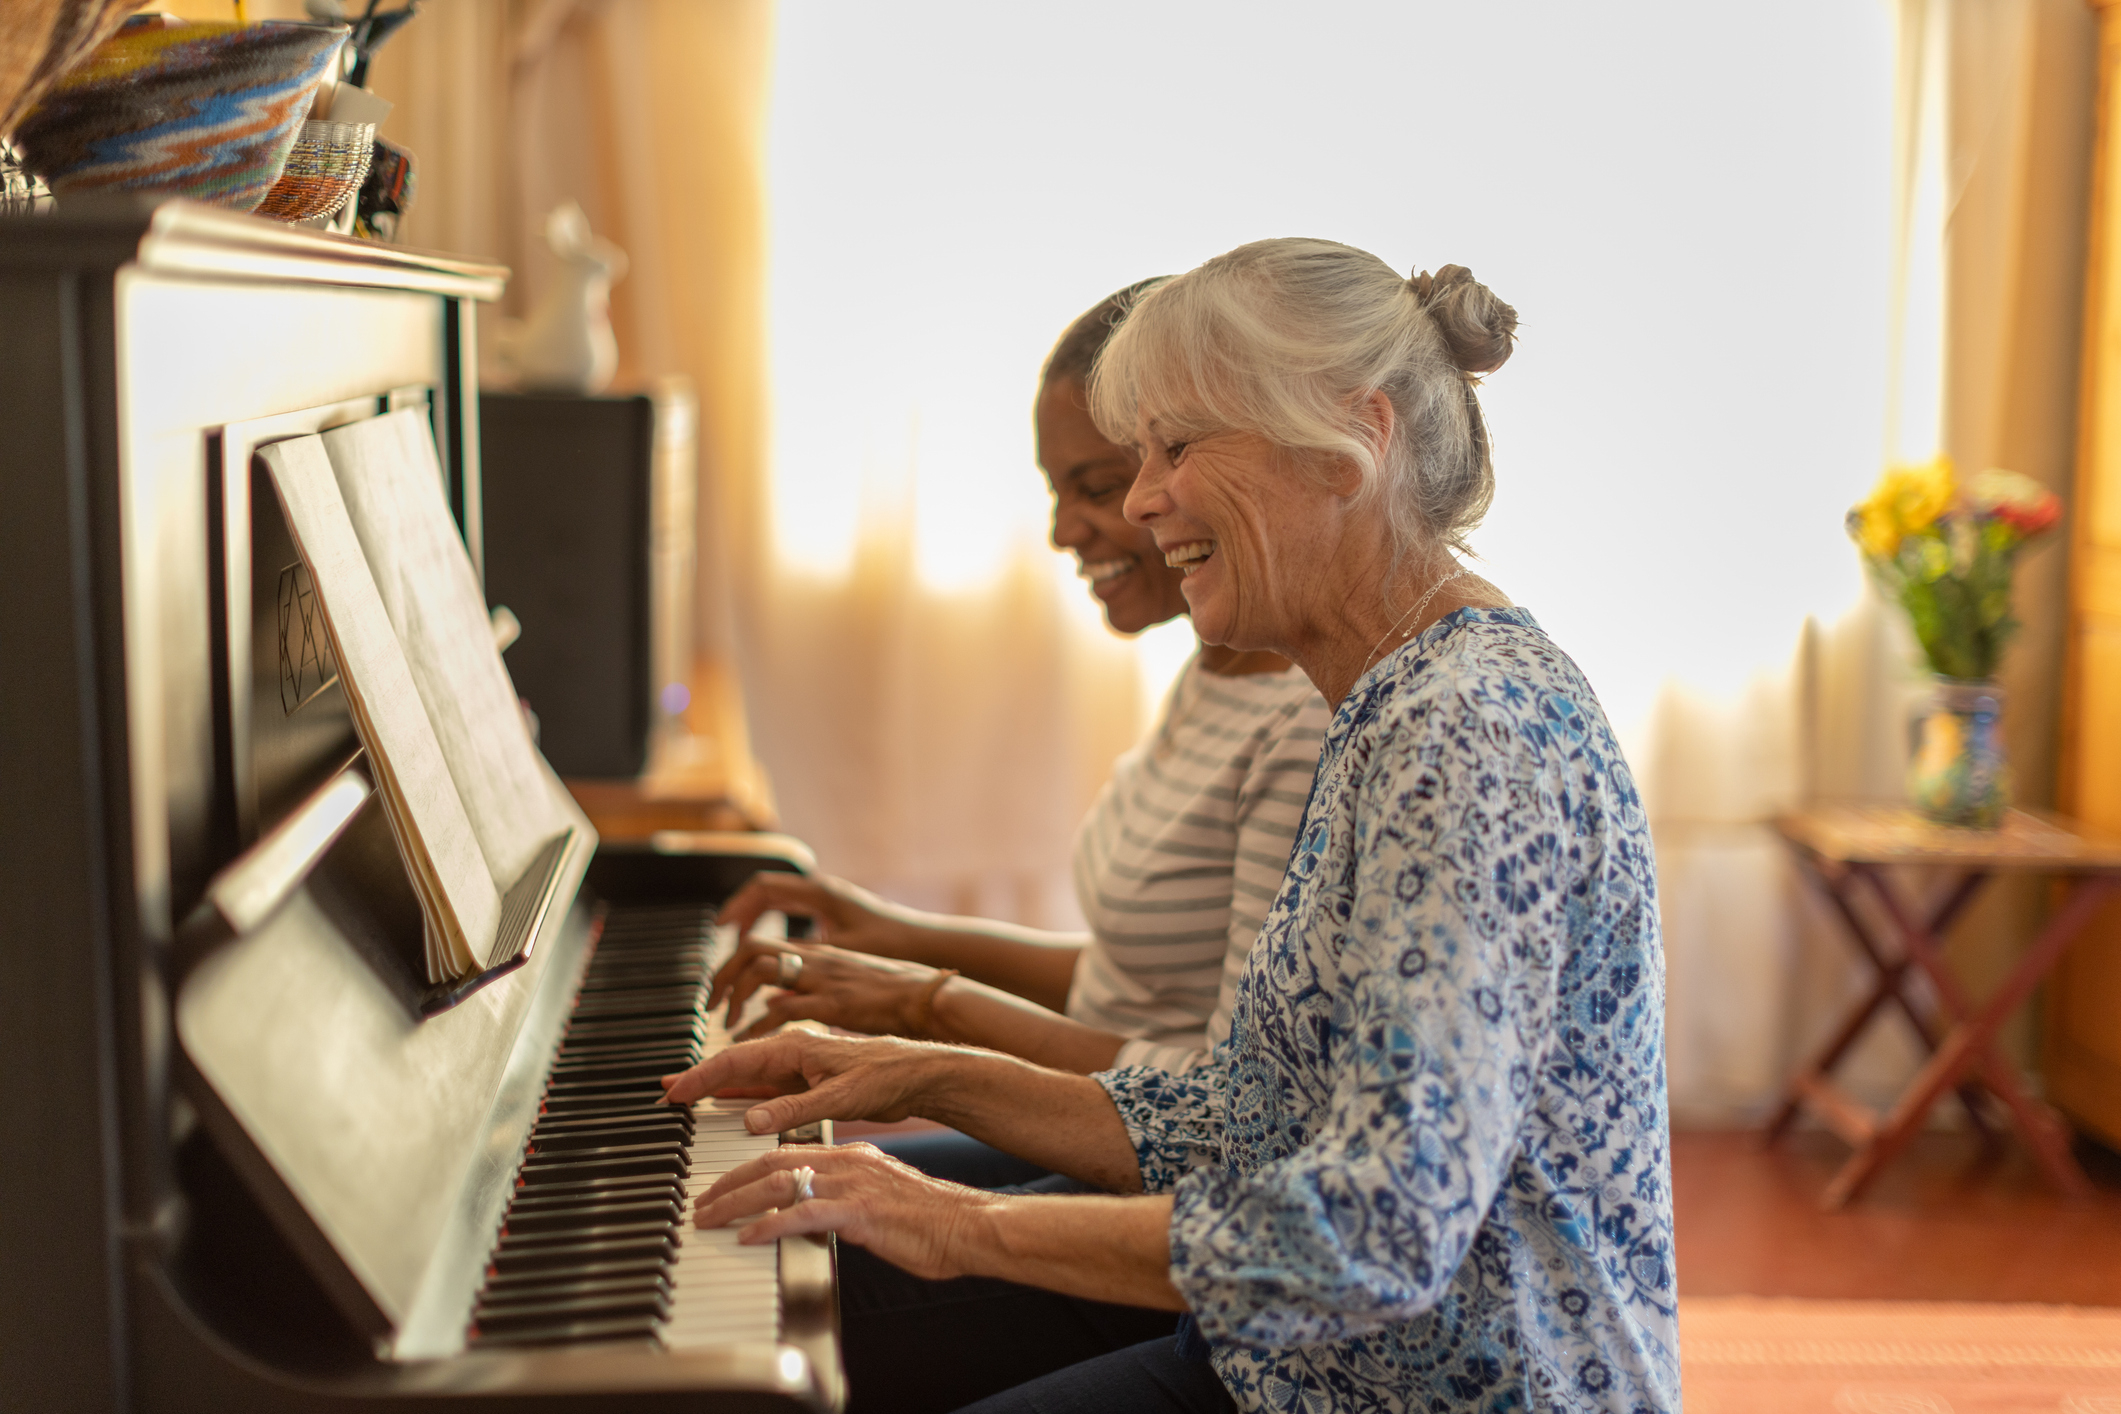 Two older women sitting and playing piano while smiling